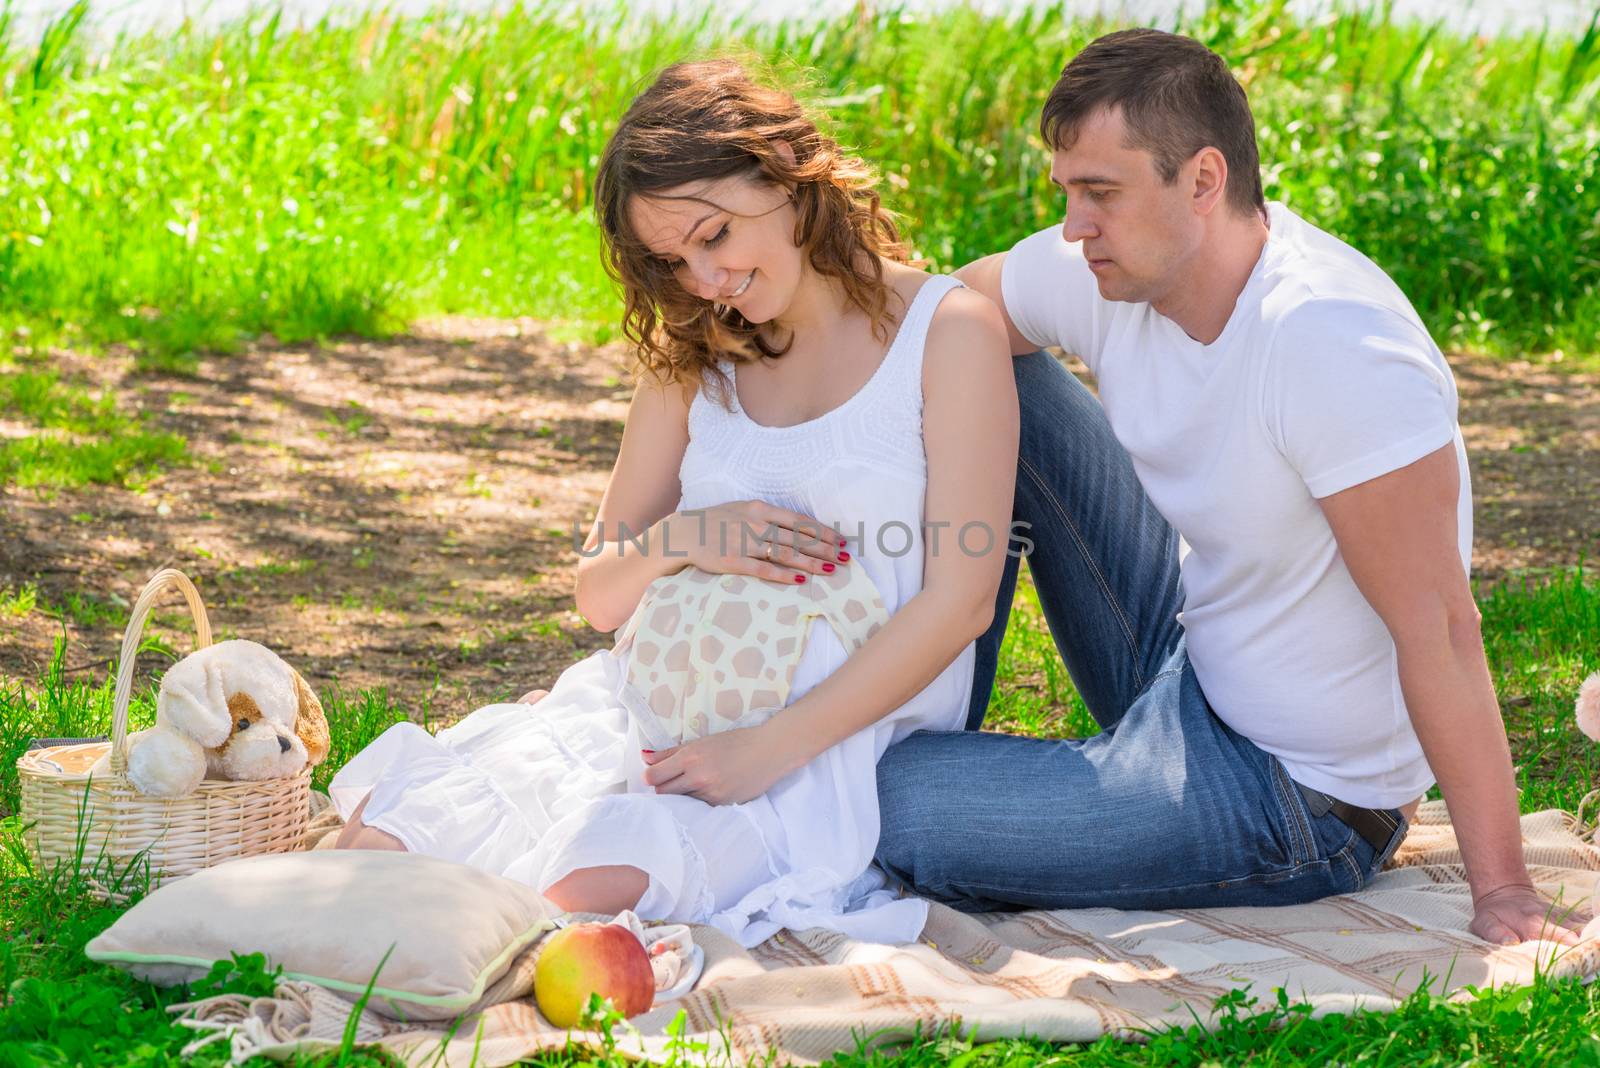 Family in anticipation of a child, rest near a lake in a park on by kosmsos111